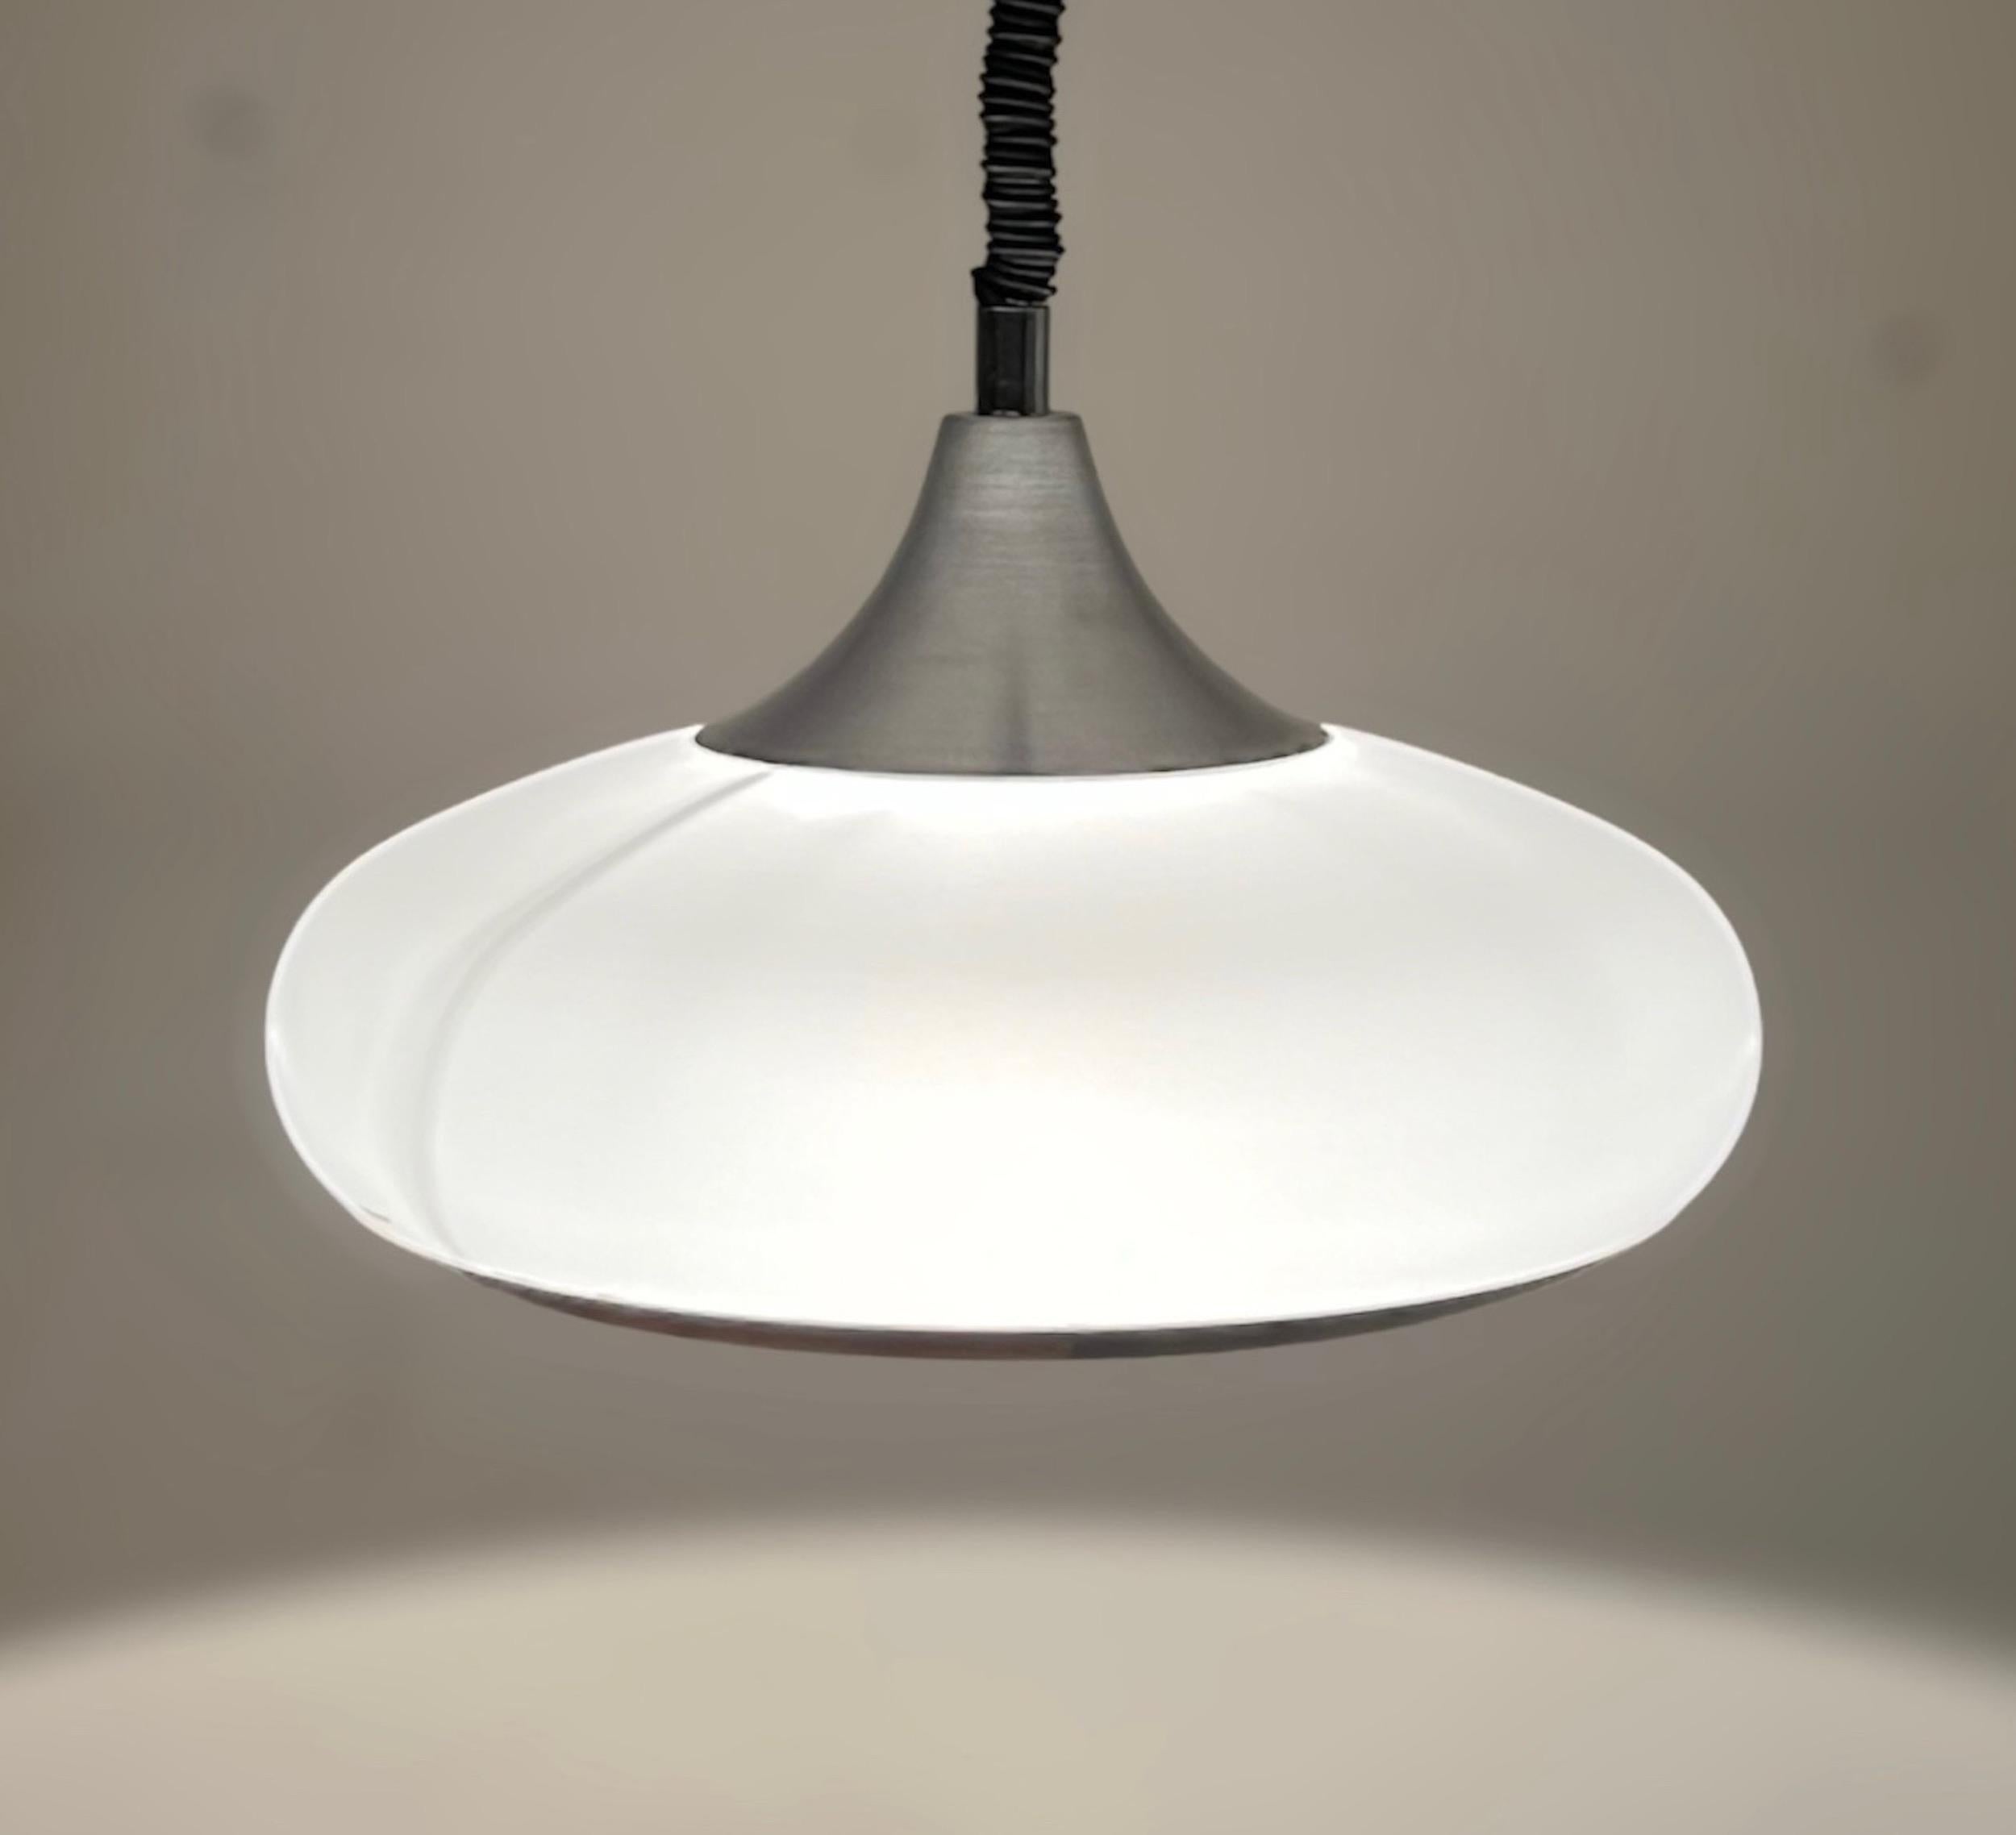 Iconic 70s space age pendant lamp made by Stilux Milano. This lamp is made of a conic silver metal top, that supports a big, curved white polymethacrylate lampshade.

The latch mechanism is the famous “Rolly”, made in Italy in the 70s. The extension